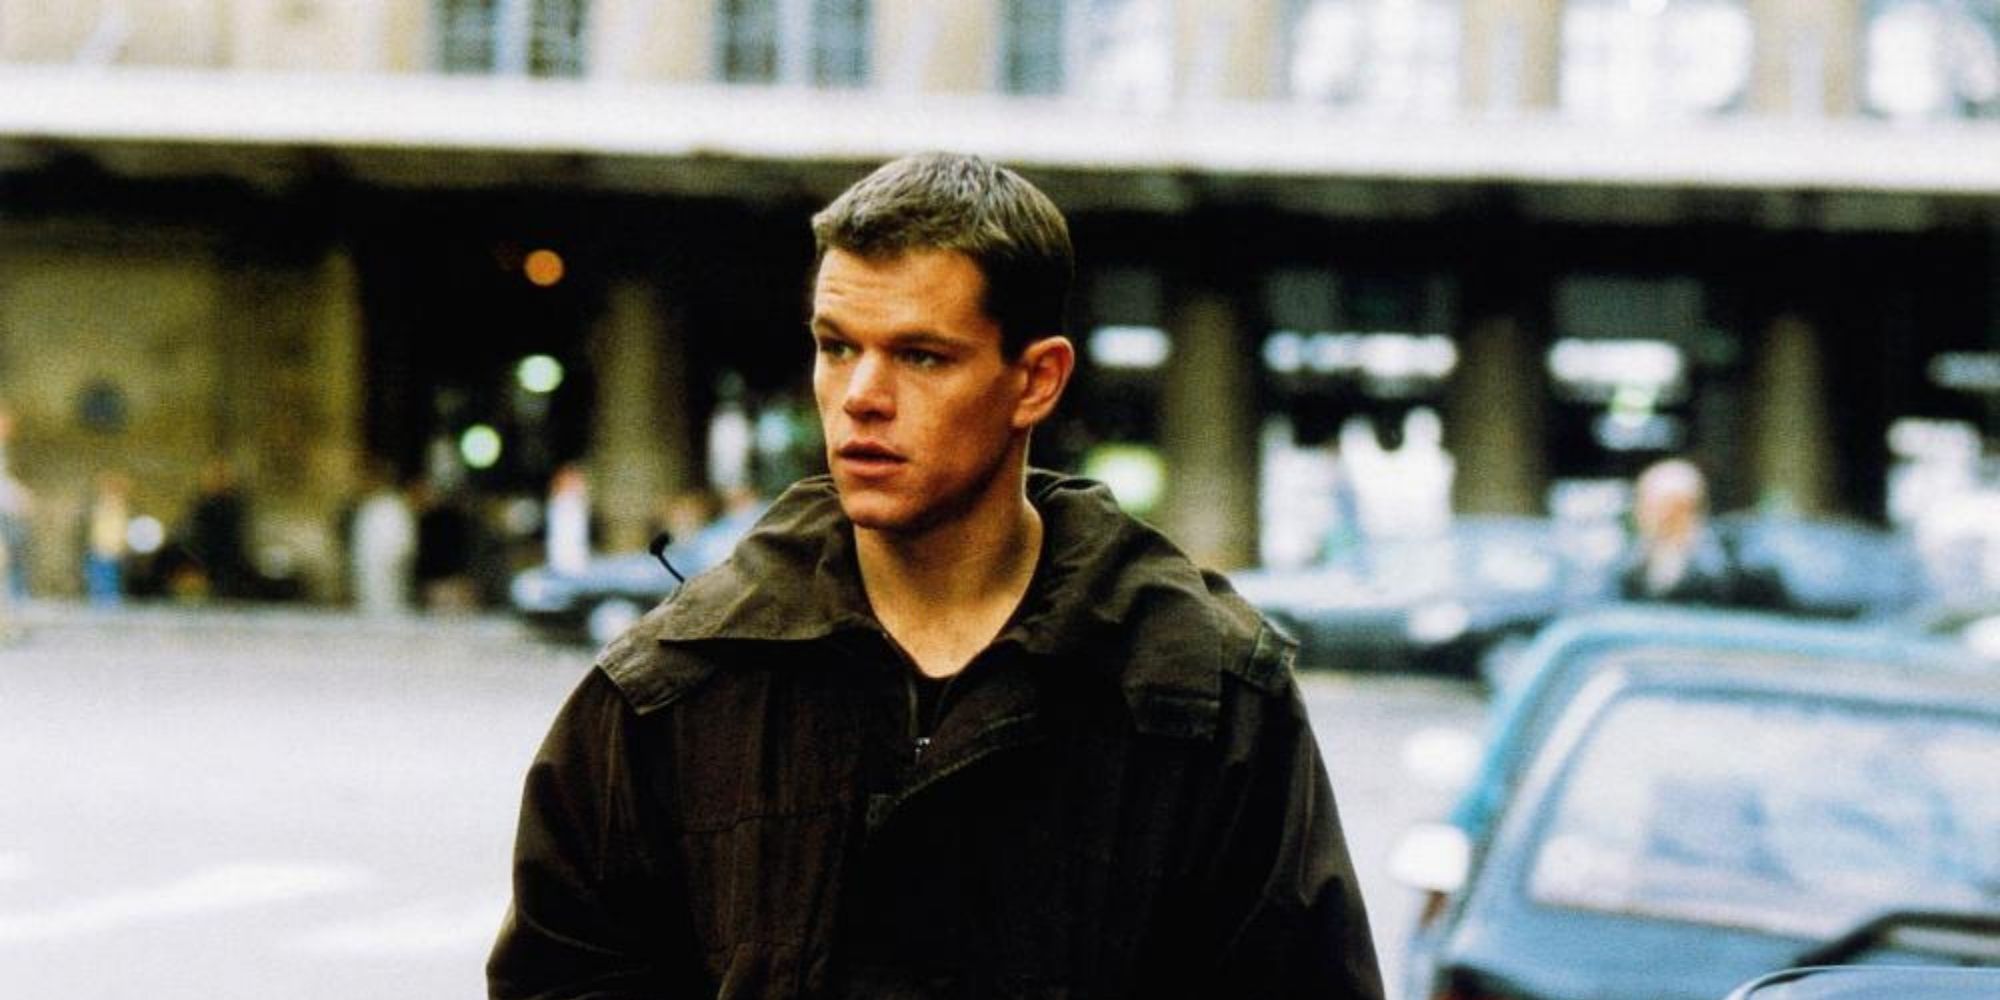 An image from the movie The Bourne Identity (2002).